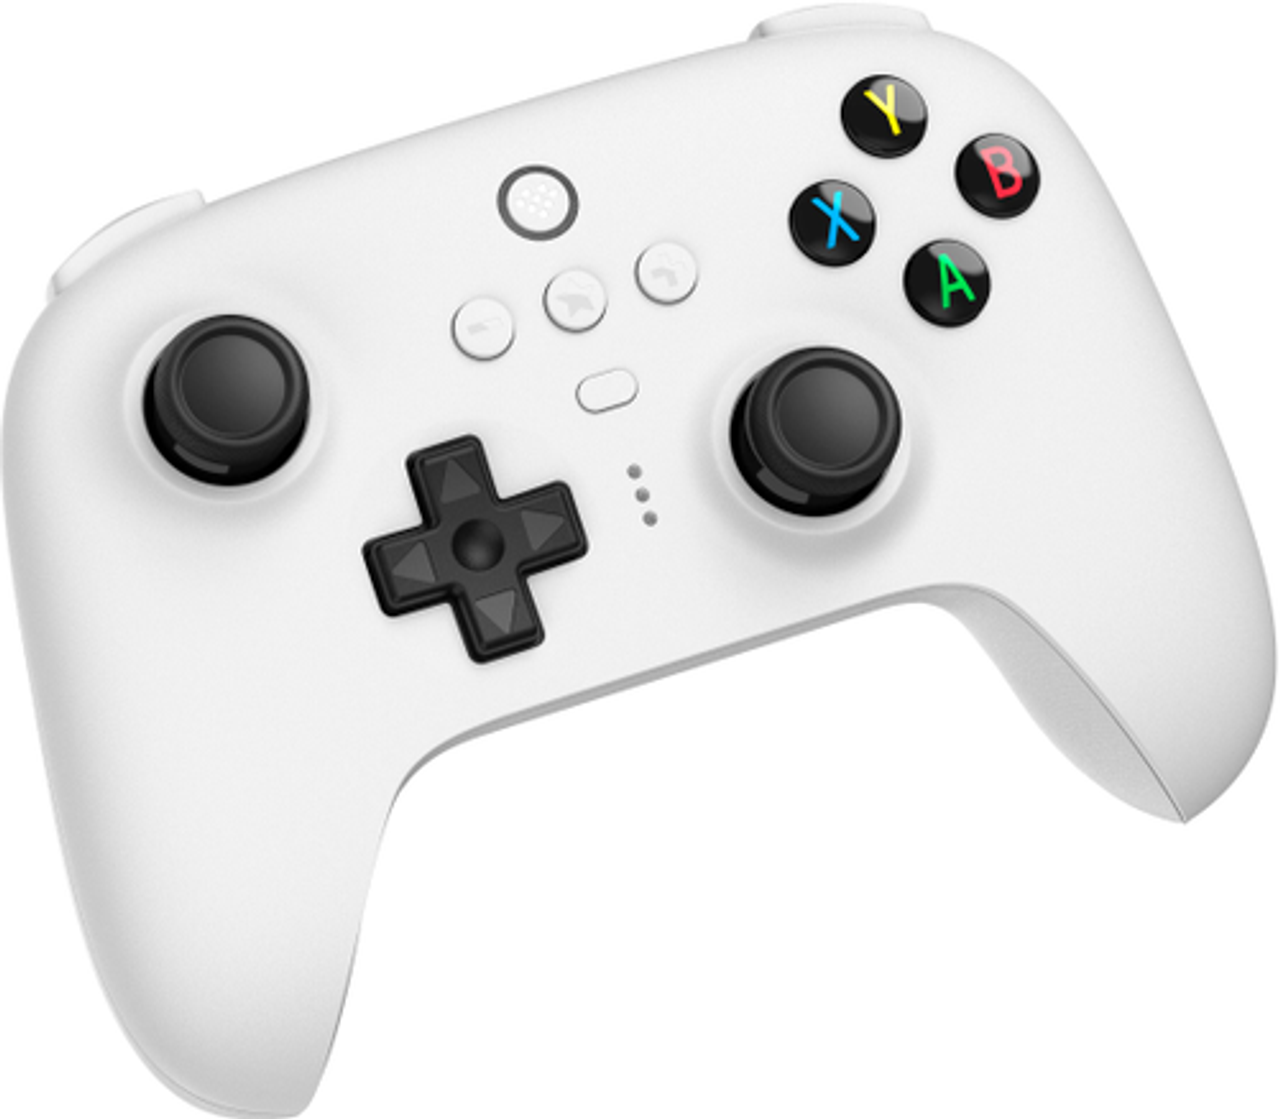 8BitDo - Ultimate 2.4G Controller for Windows PCs with Dock - White